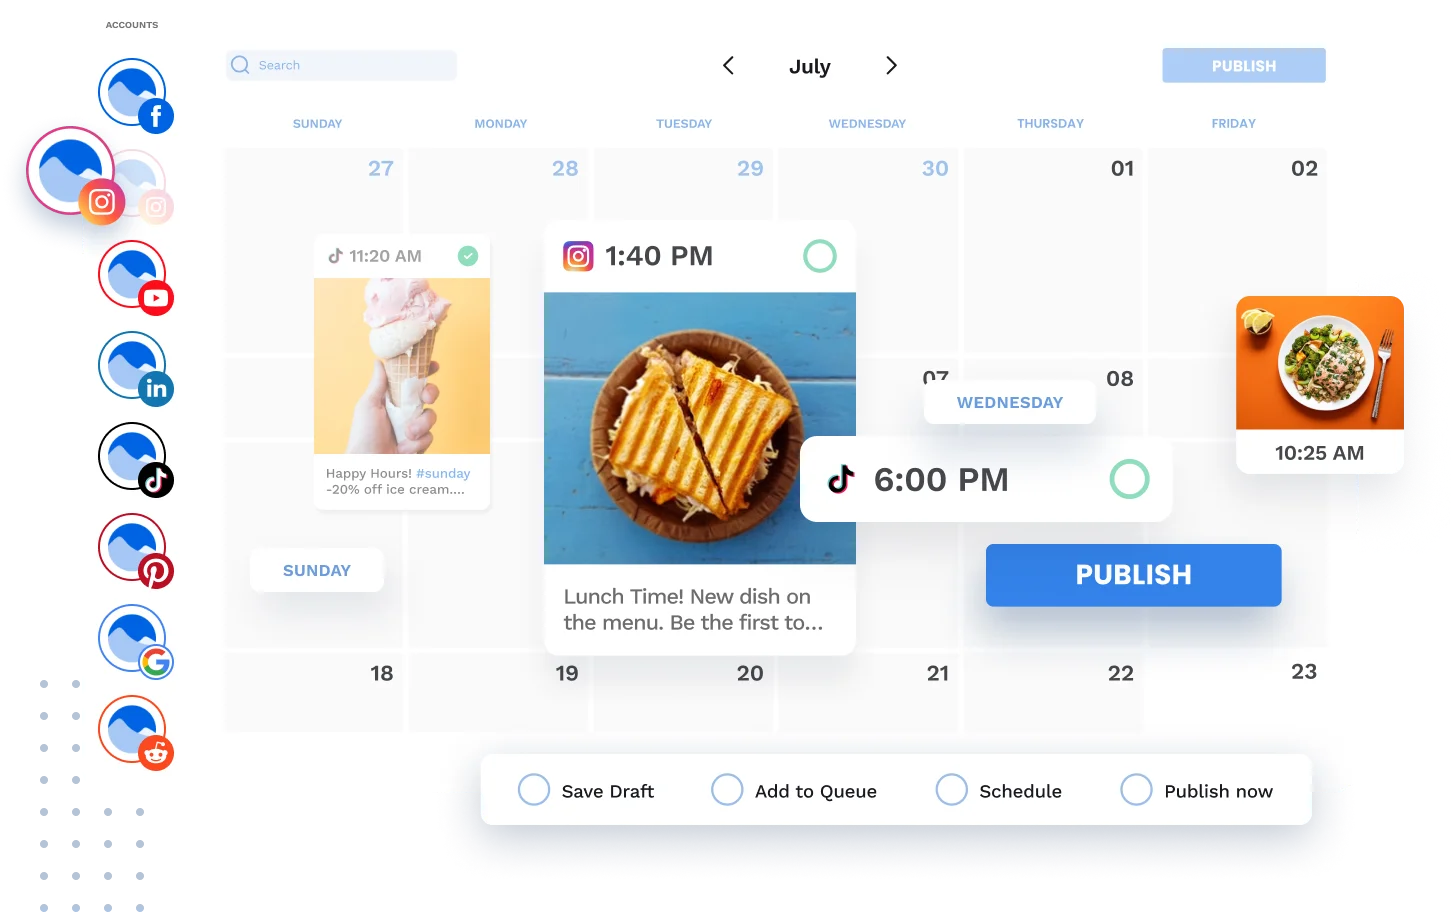 Find, collaborate, schedule and boost content for all your social channels. Visually schedule and preview your social media posts.